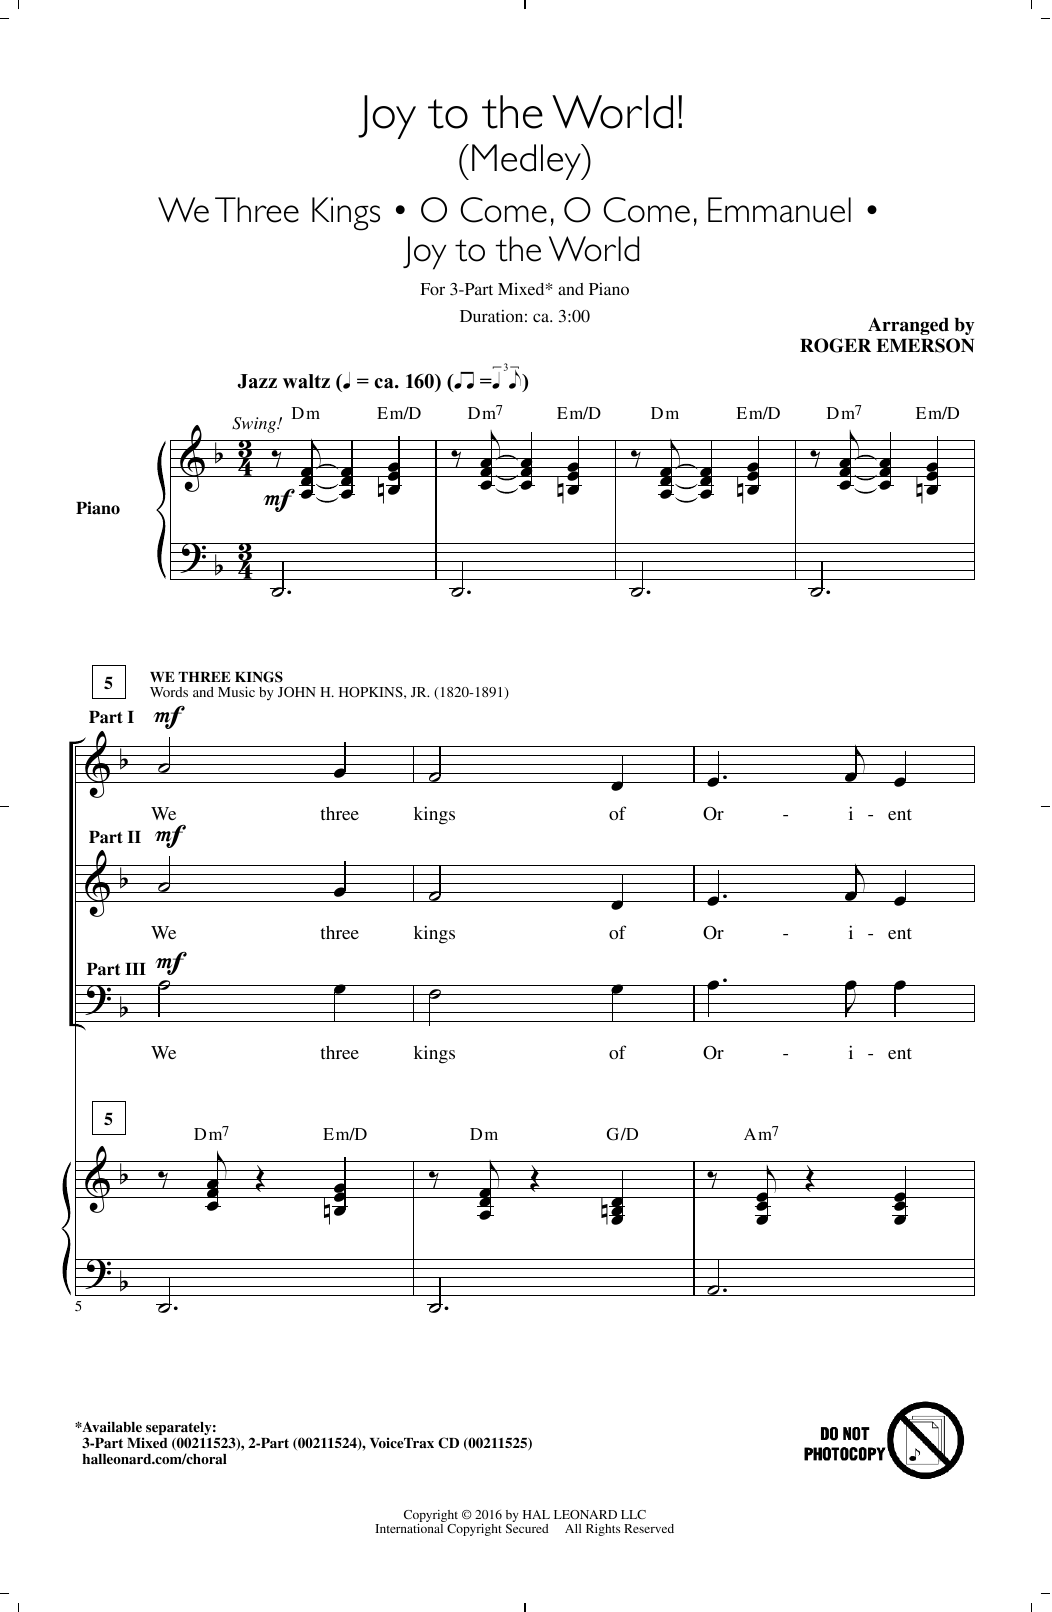 Download Roger Emerson Joy To The World! (Medley) Sheet Music